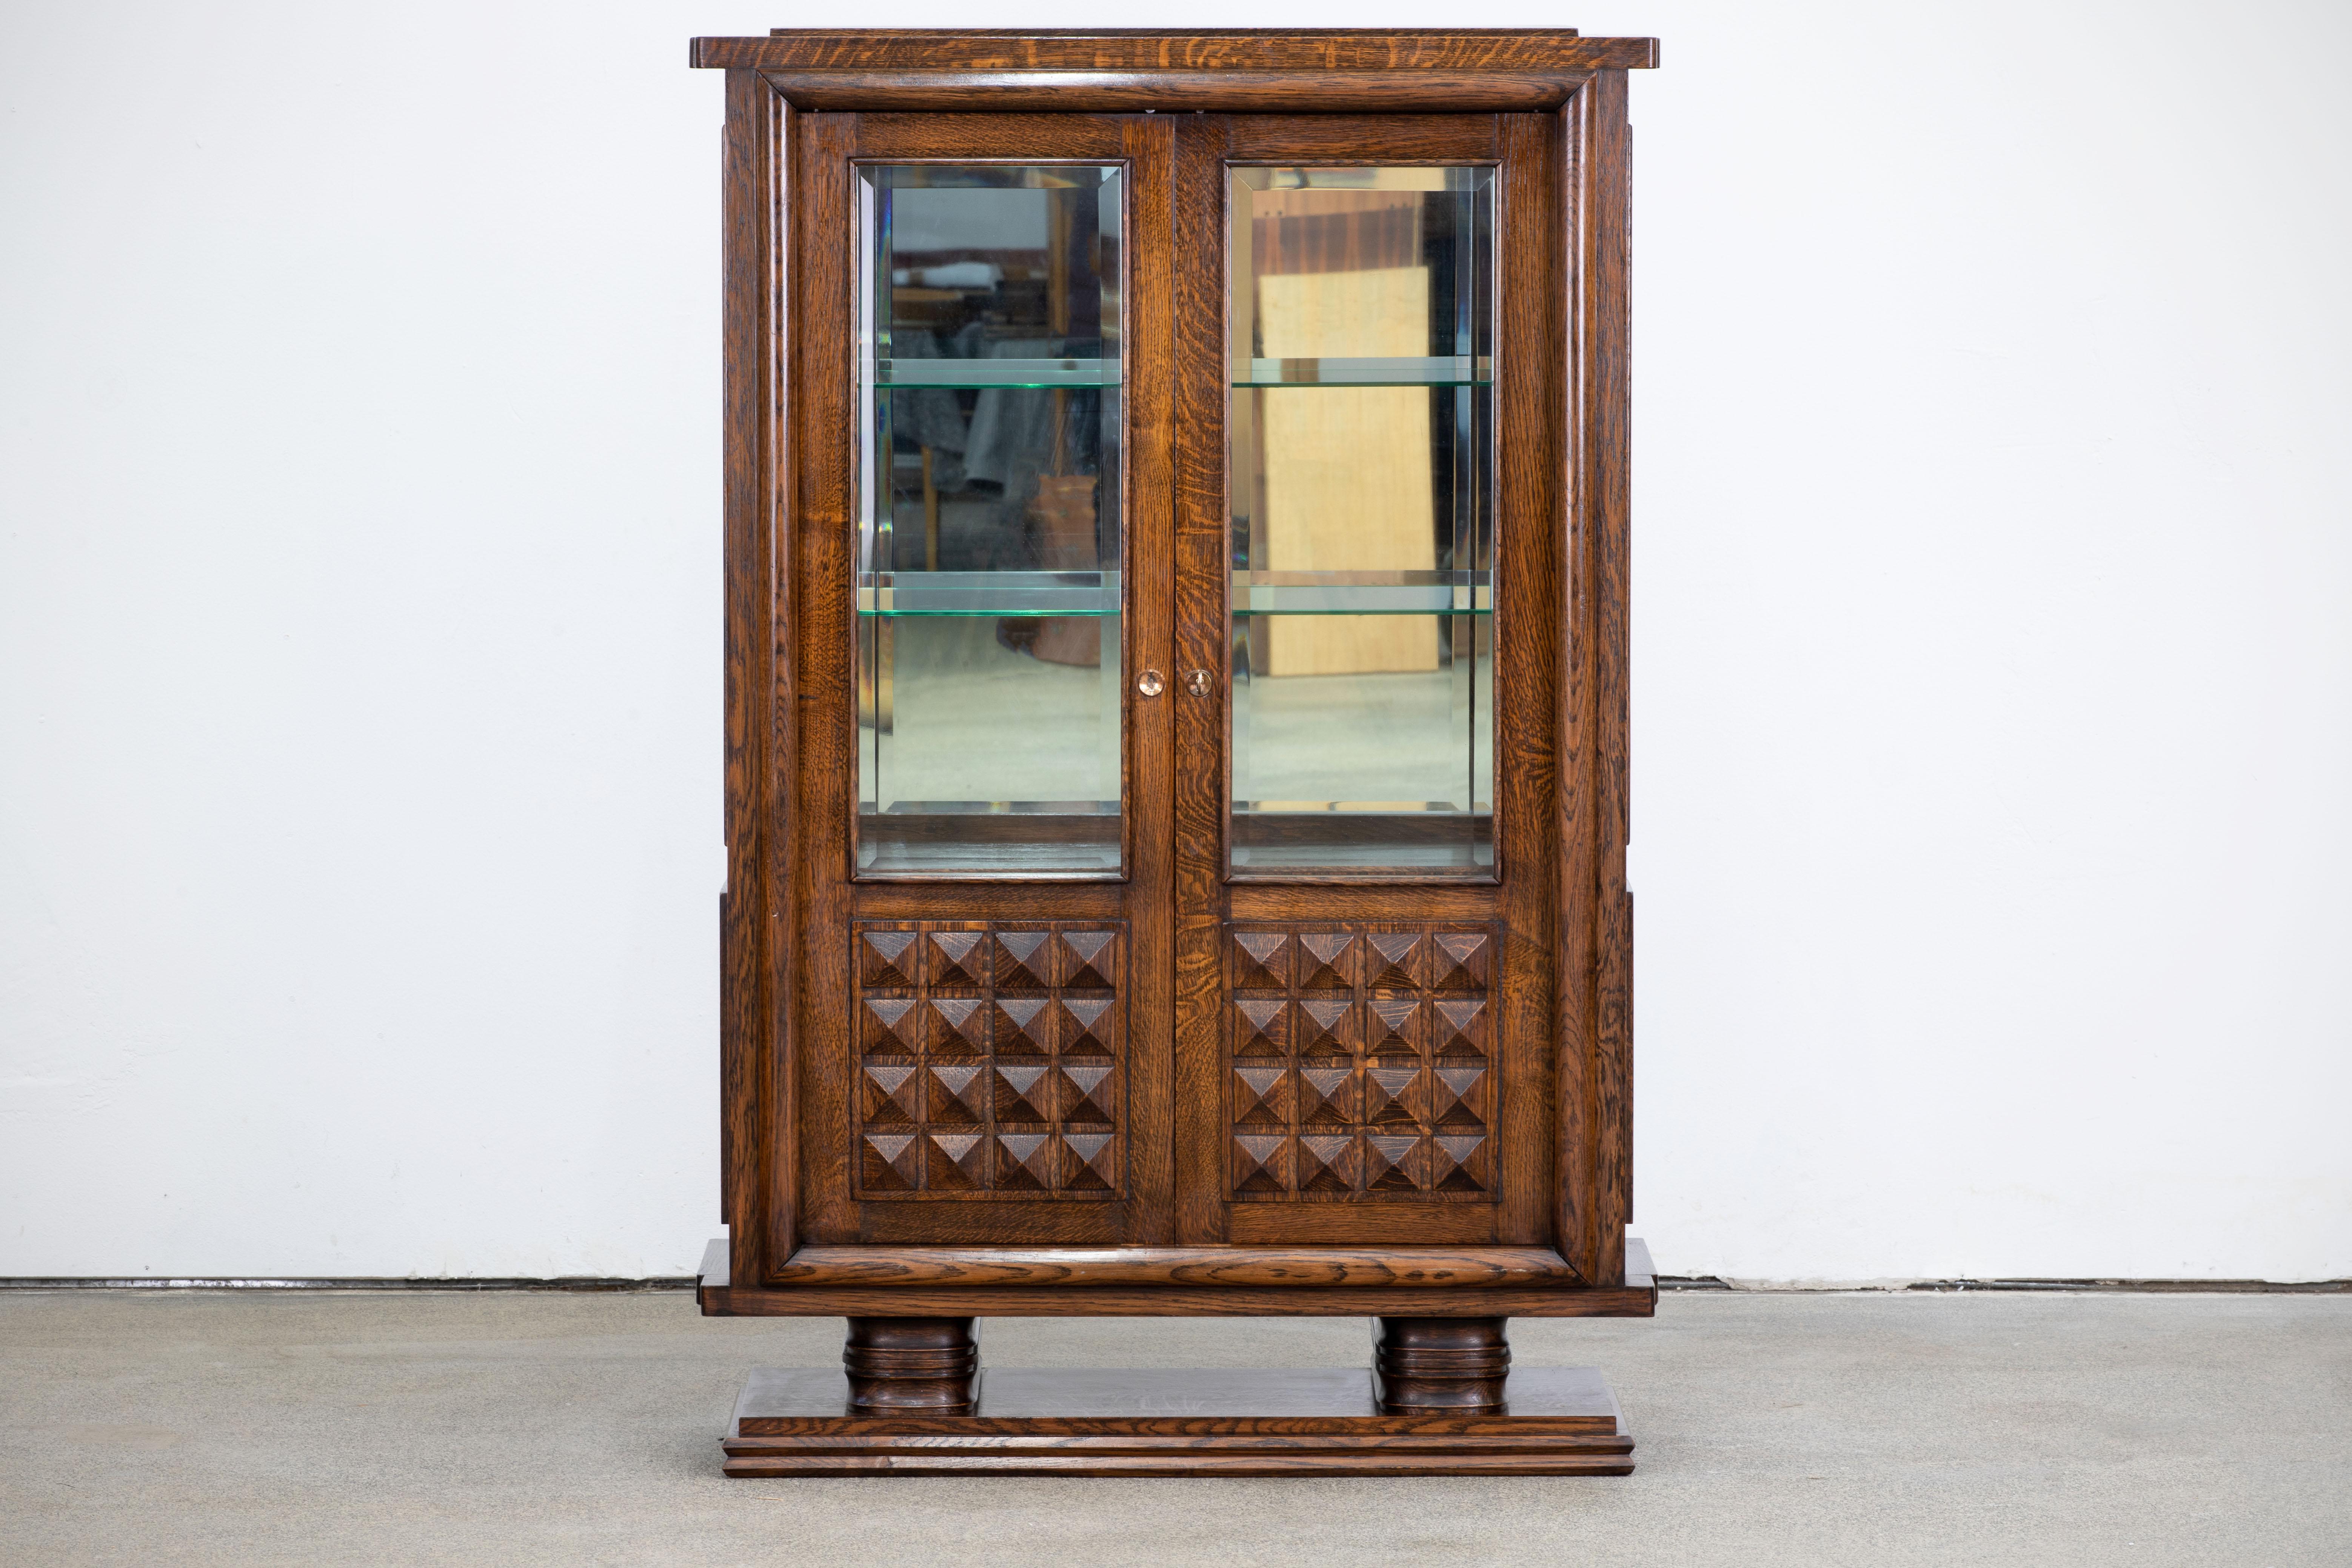 This French Brutalist Art Deco buffet / cabinet / vitrine in solid oak was created in the 1940s by Gaston Poisson. 
It is in the town of Dunkirk, Normandy, France, that we had the chance to unearth this wonderful Brutalist piece.
We can clearly